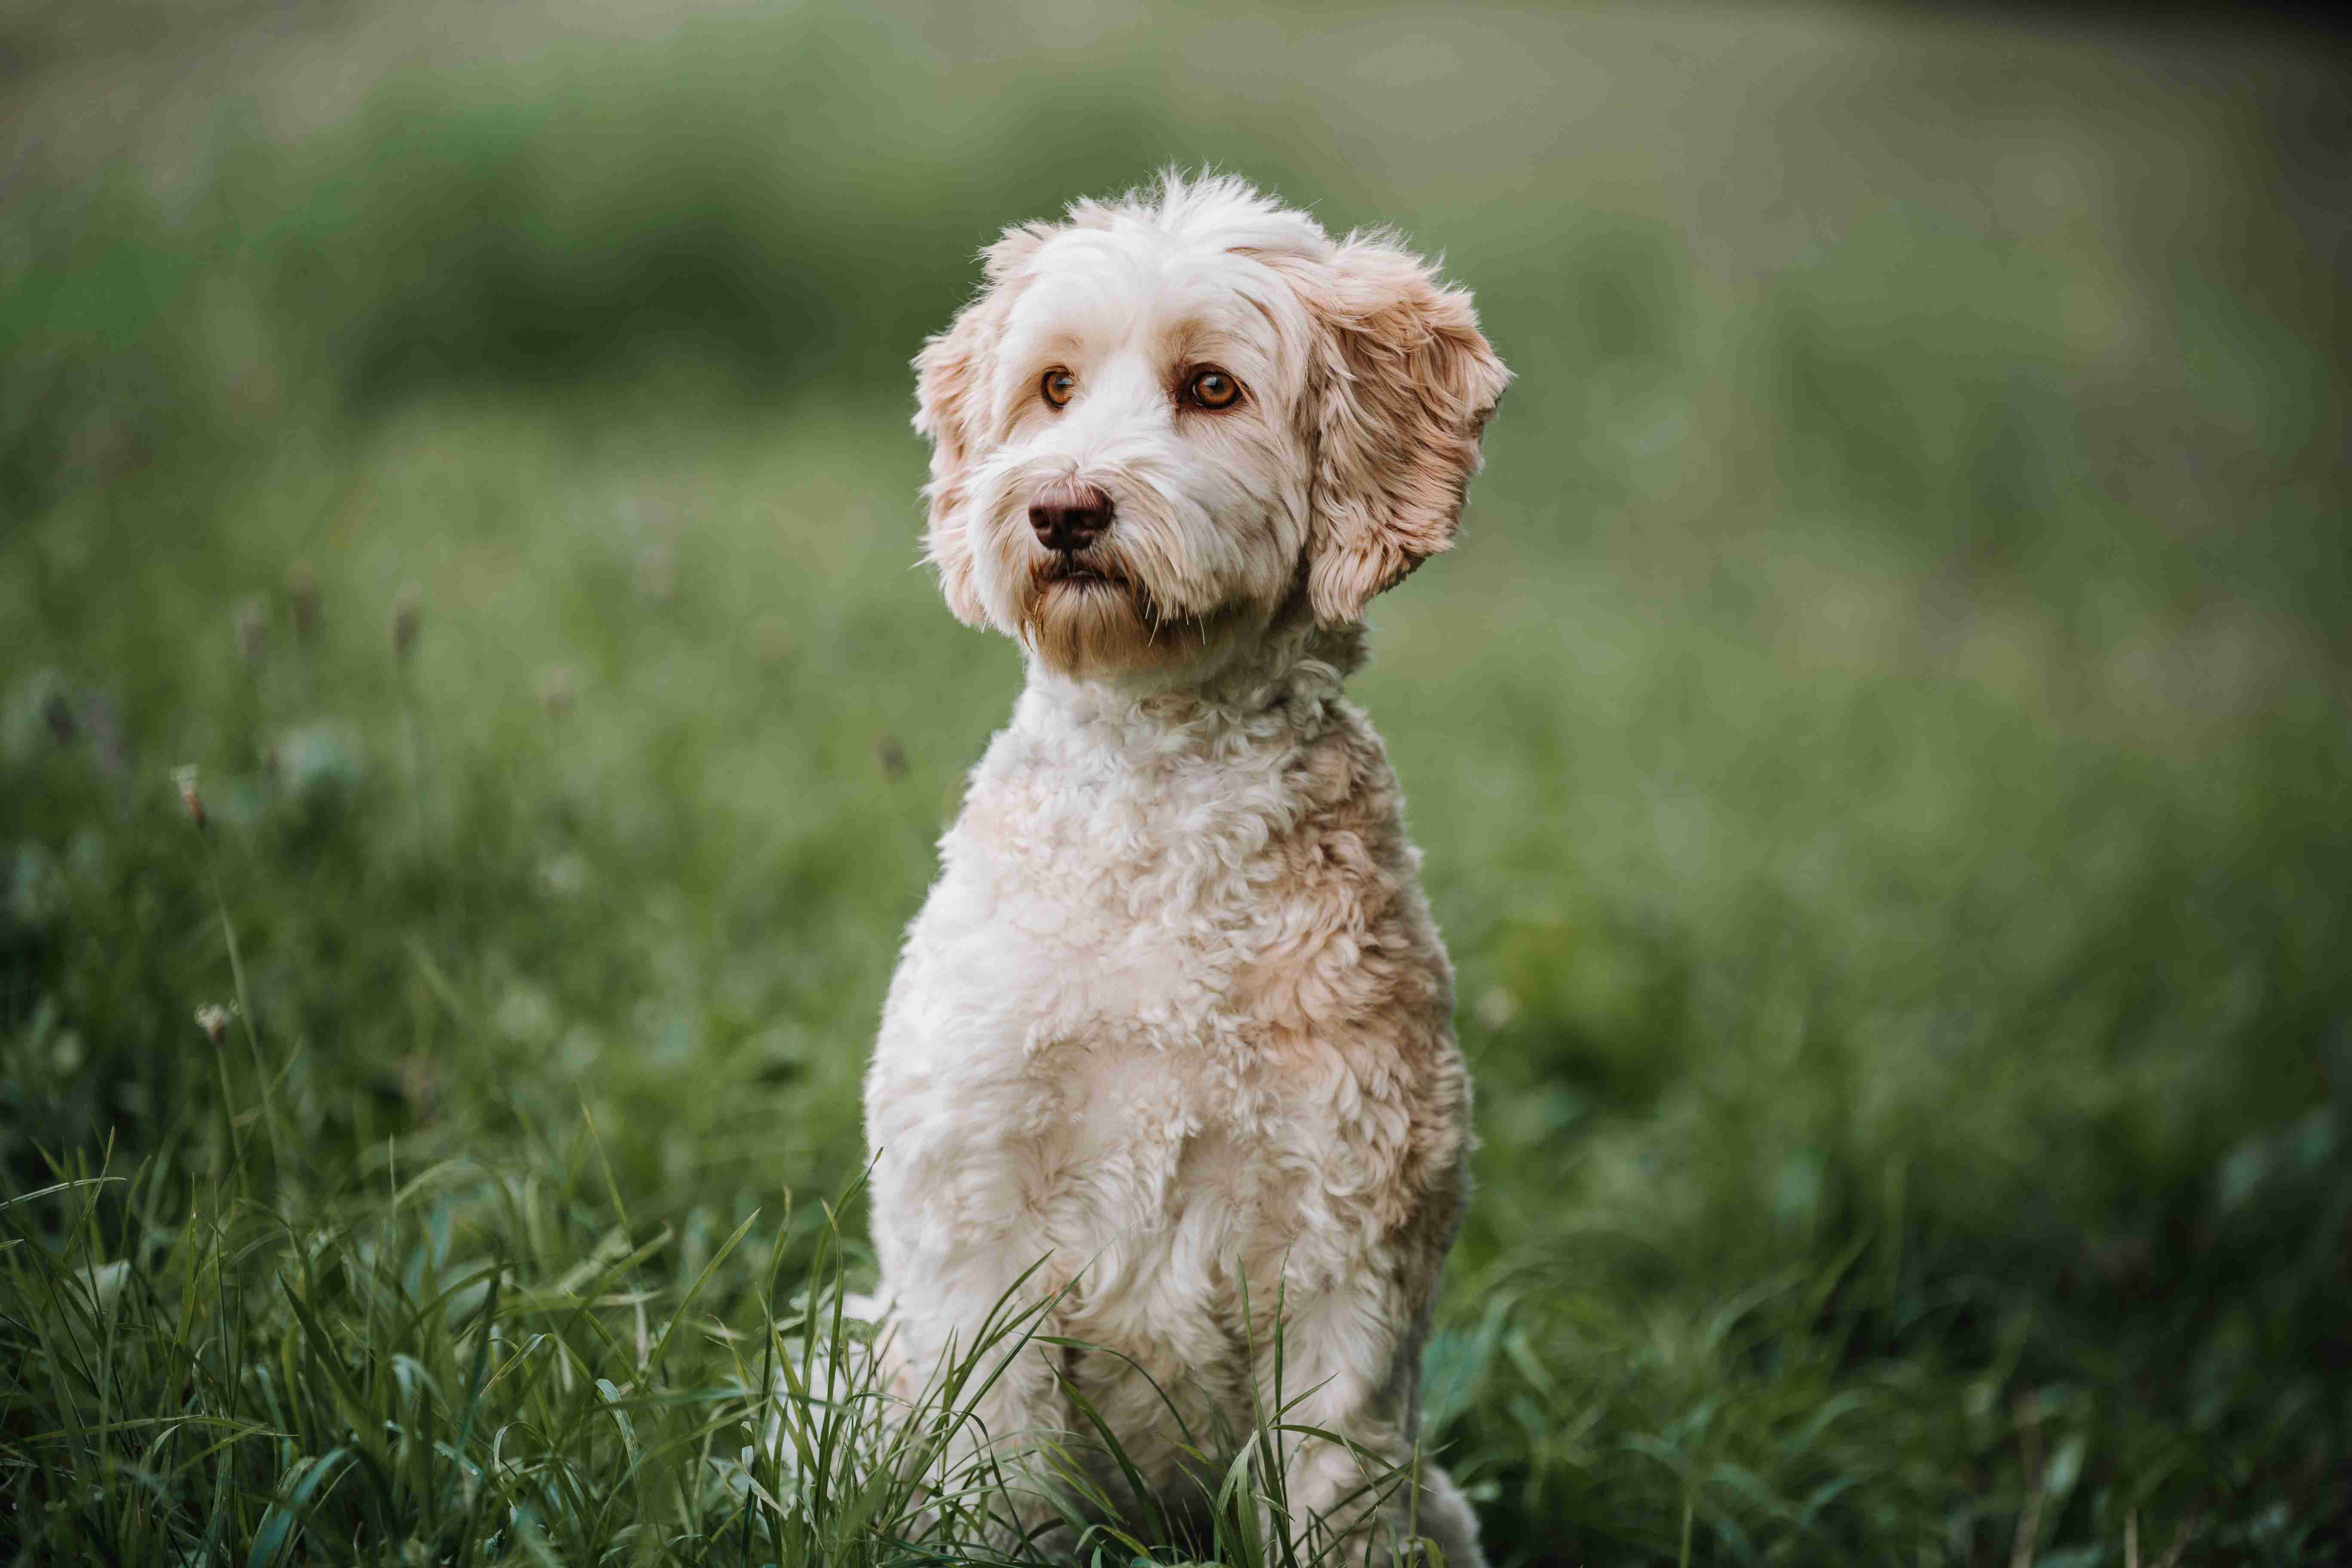 Are Poodles at risk of developing certain types of lung diseases? What treatment options are available?